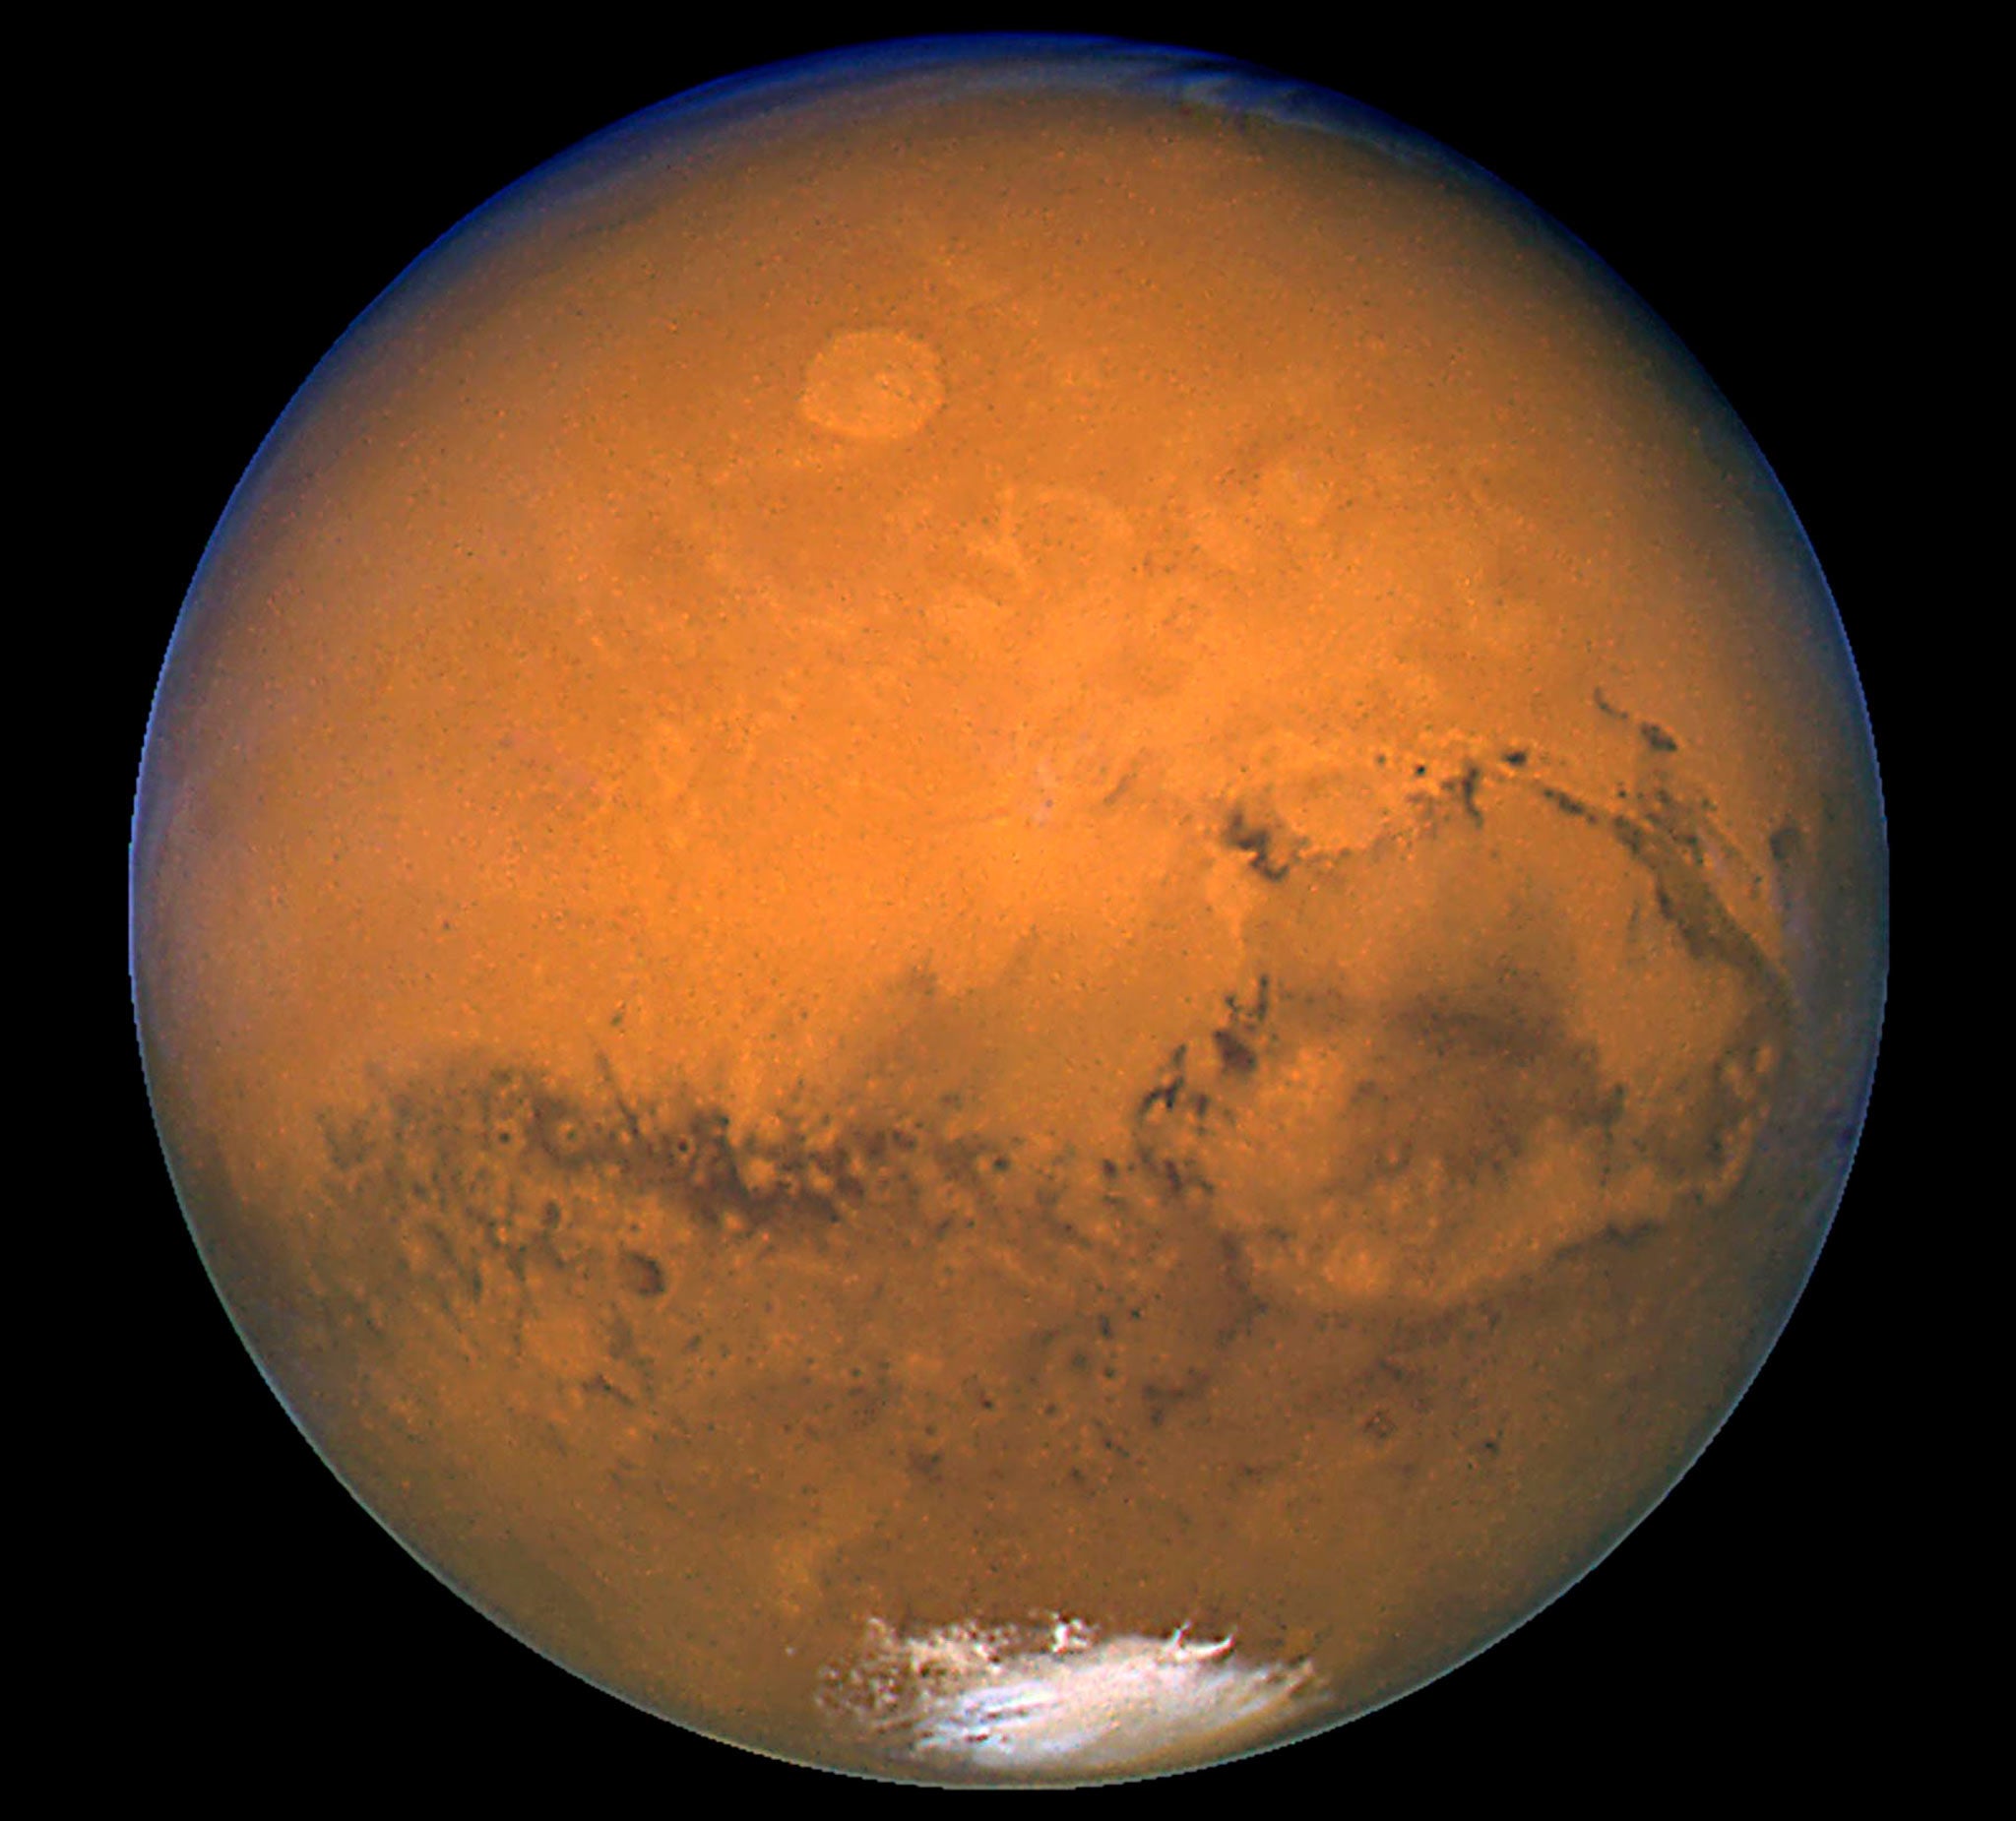 A photograph taken of Mars in 2003 by Nasa’s Hubble space telescope